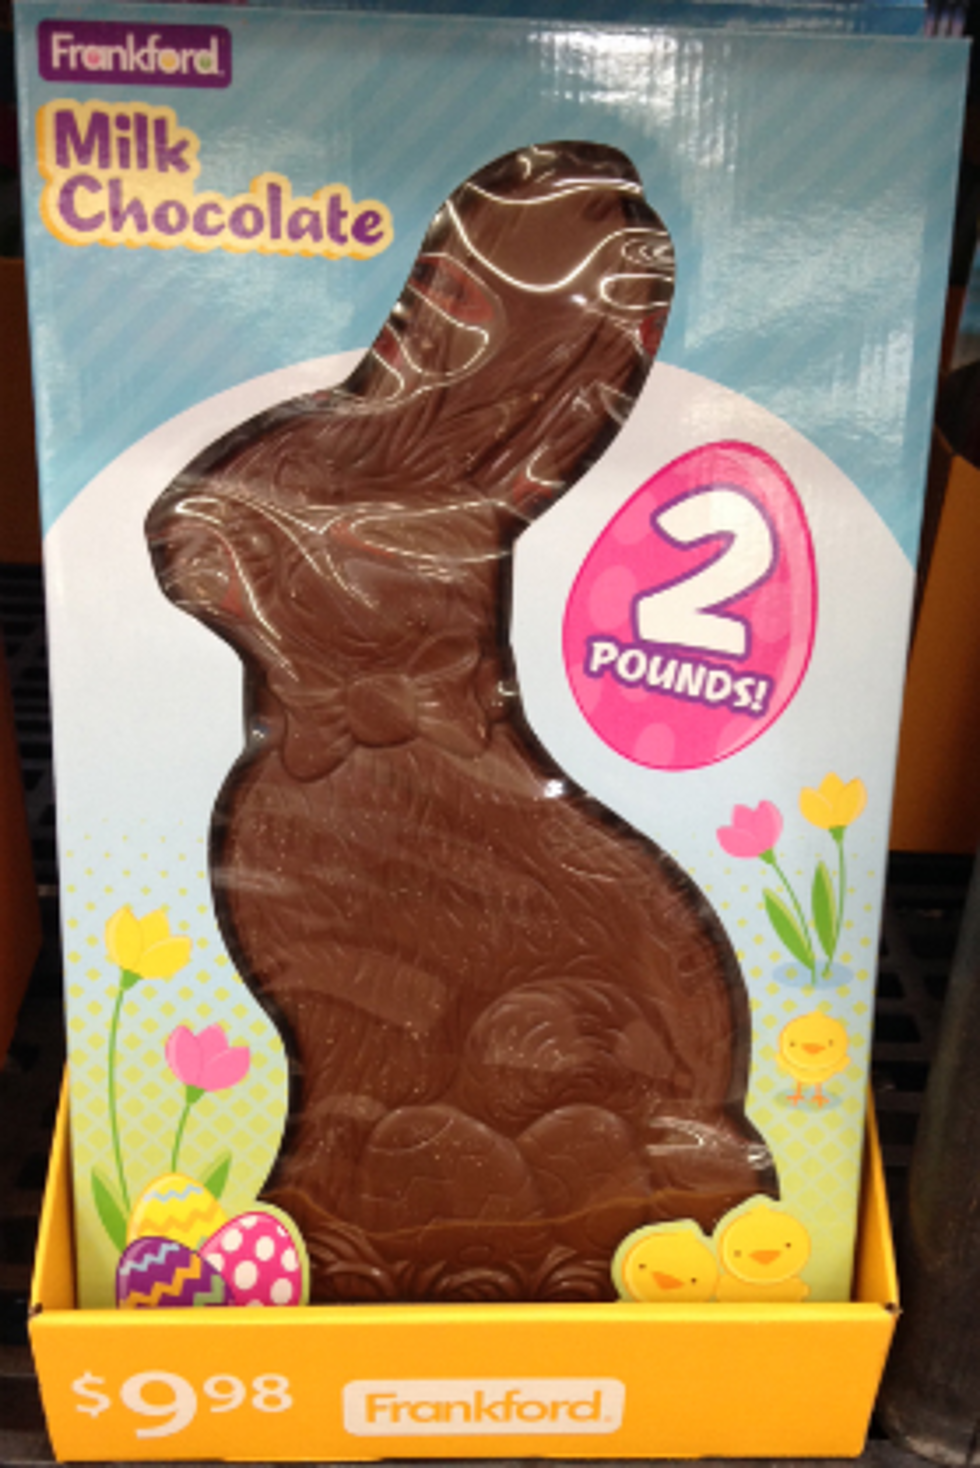 How You Eat A Chocolate Bunny Reveals Your Personality